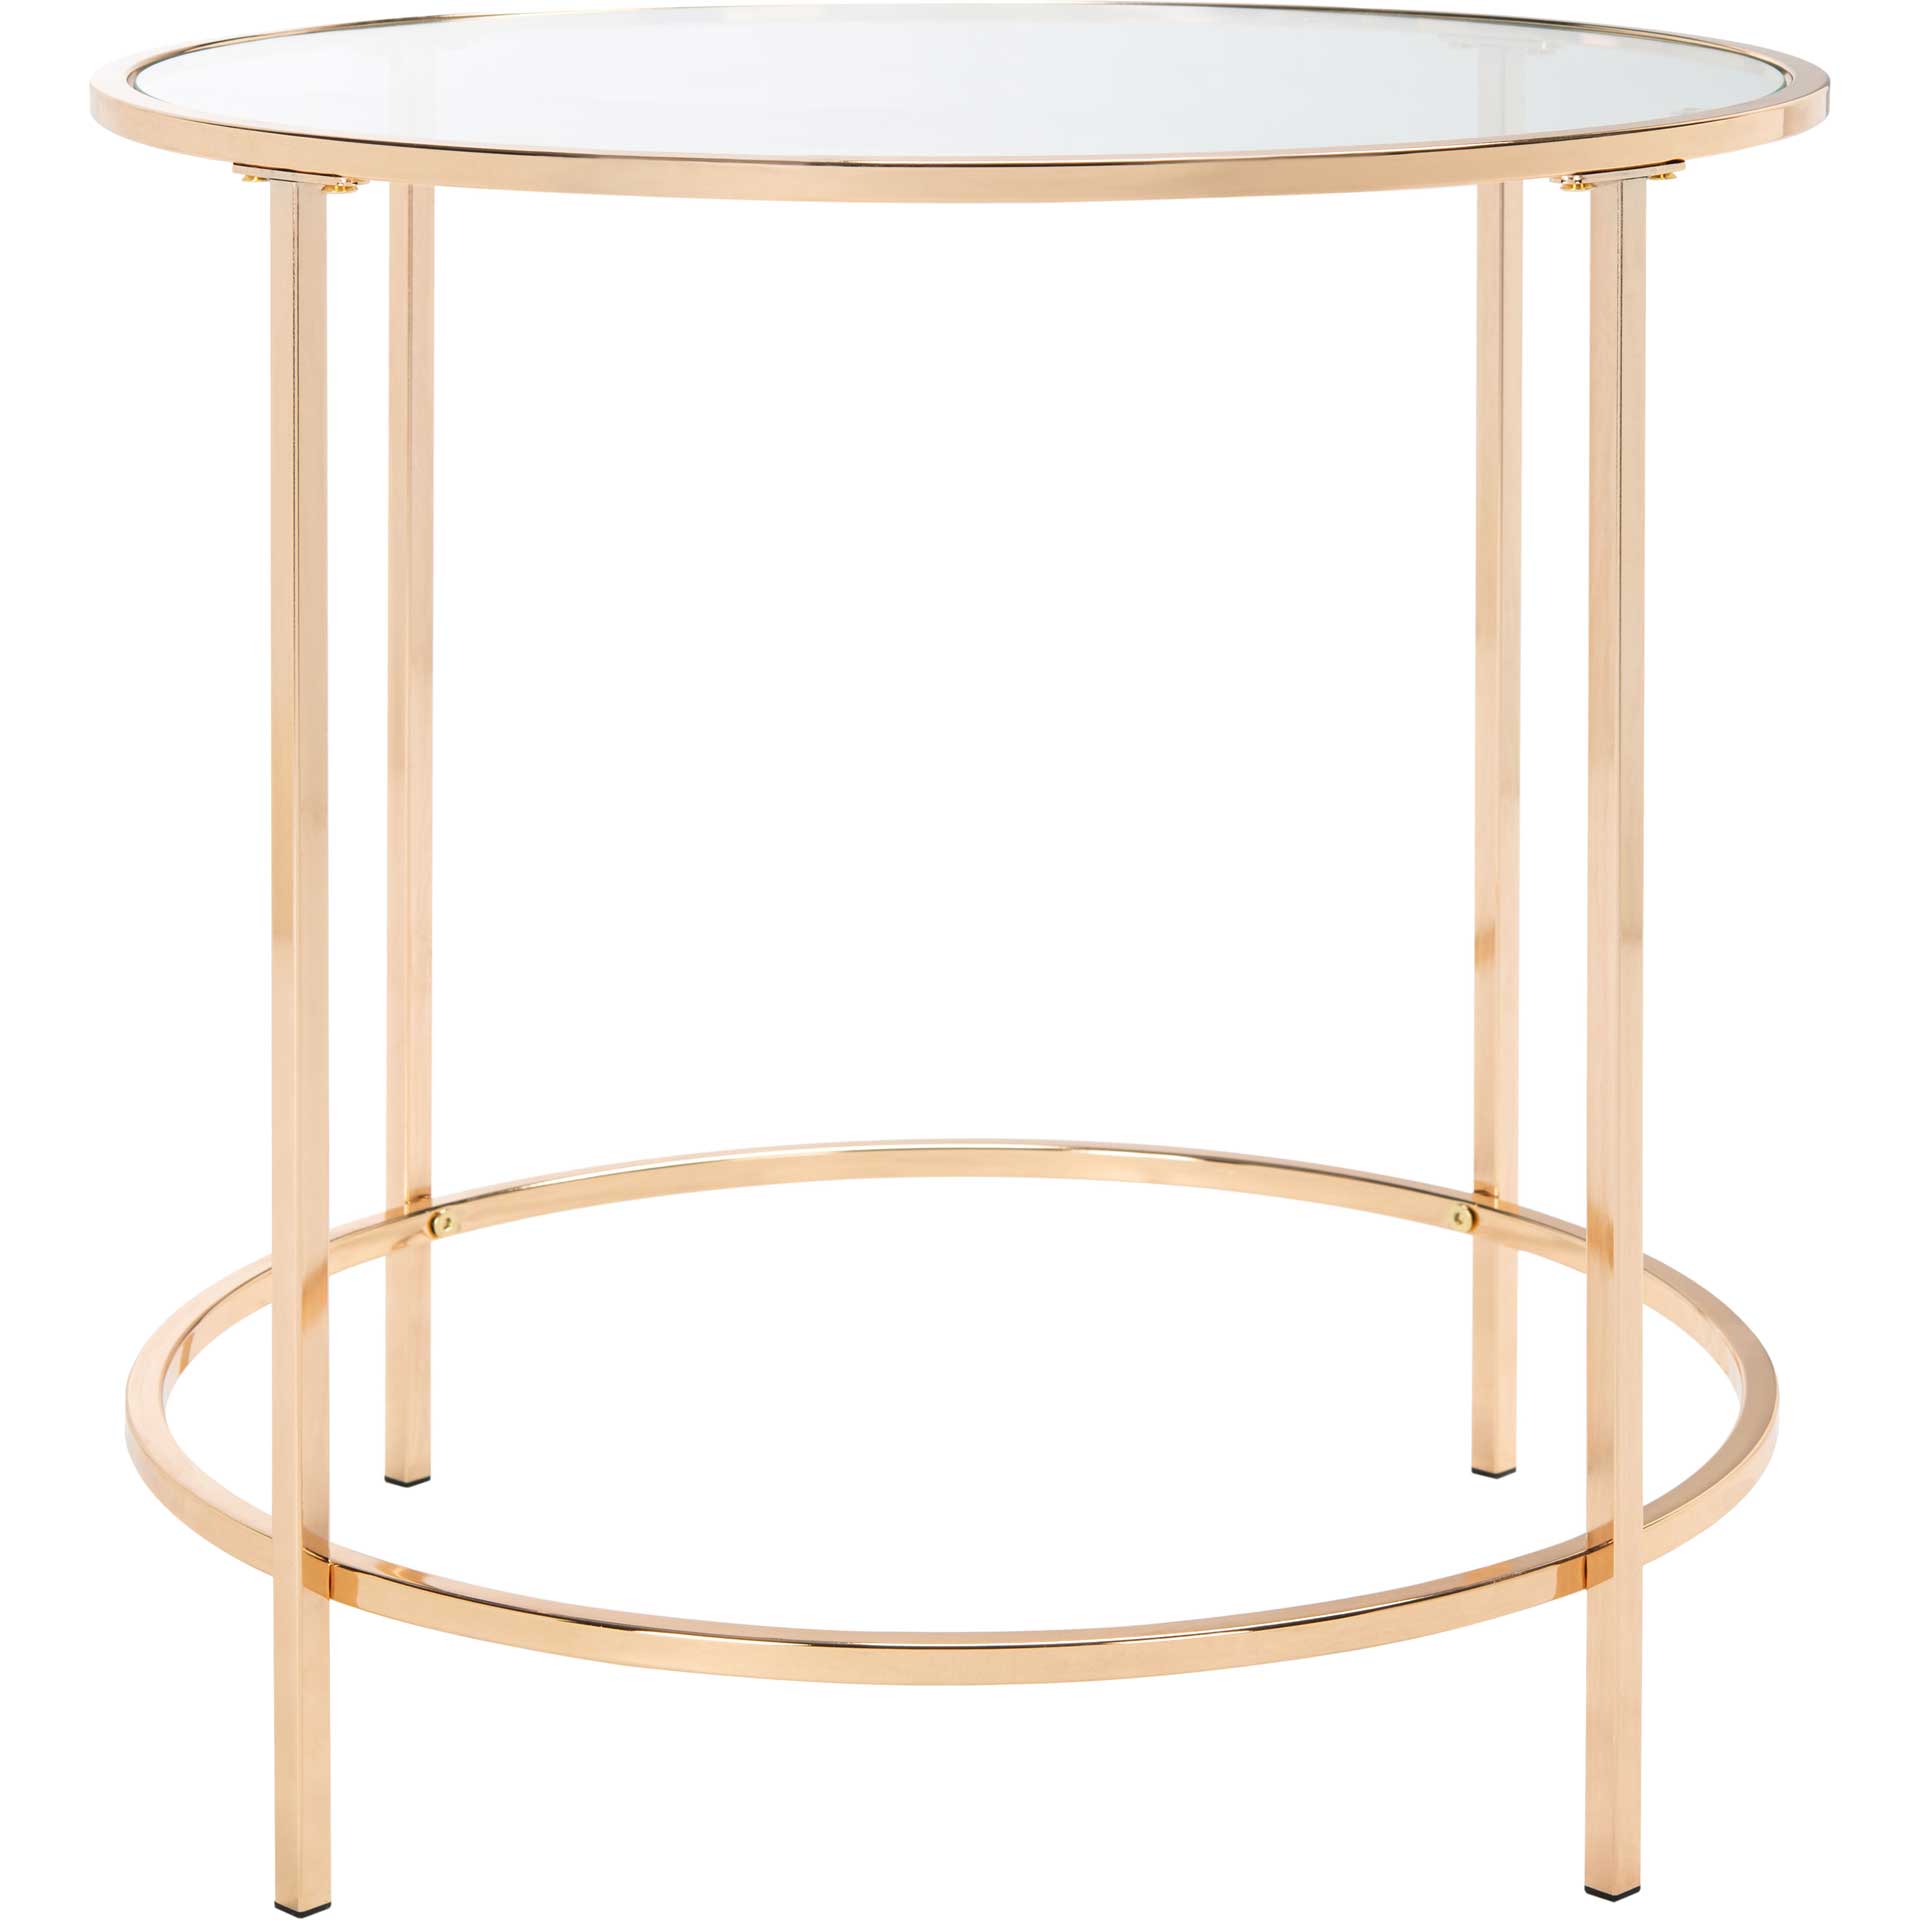 Kody Round Glass Side Table Gold/Glass